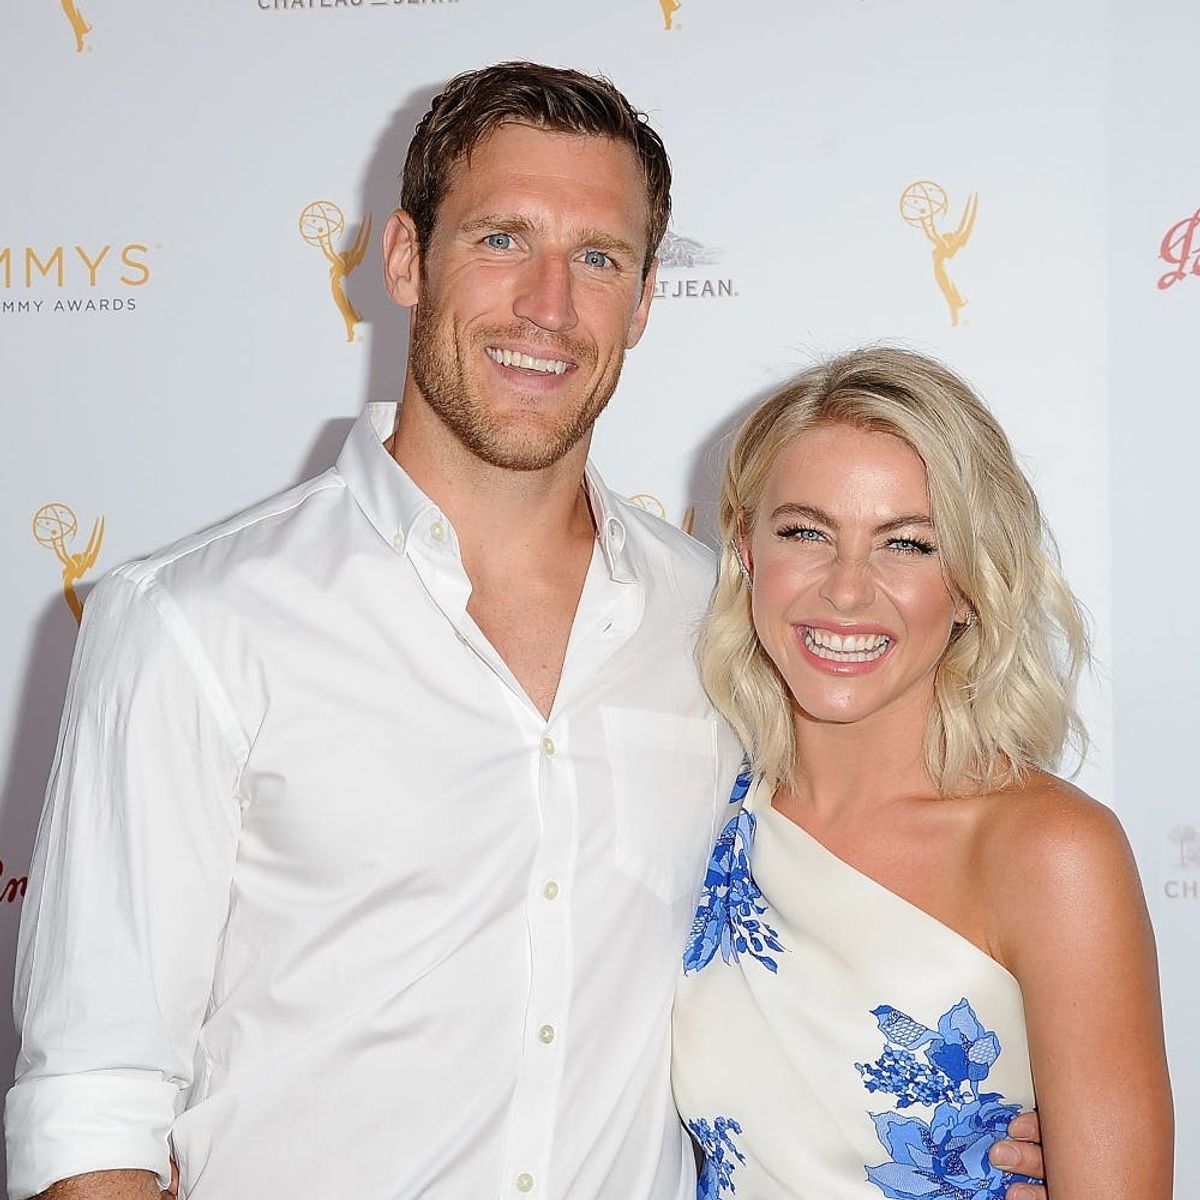 Brooks Laich’s Reaction to Julianne Hough in Her Wedding Dress Will Make You Swoon